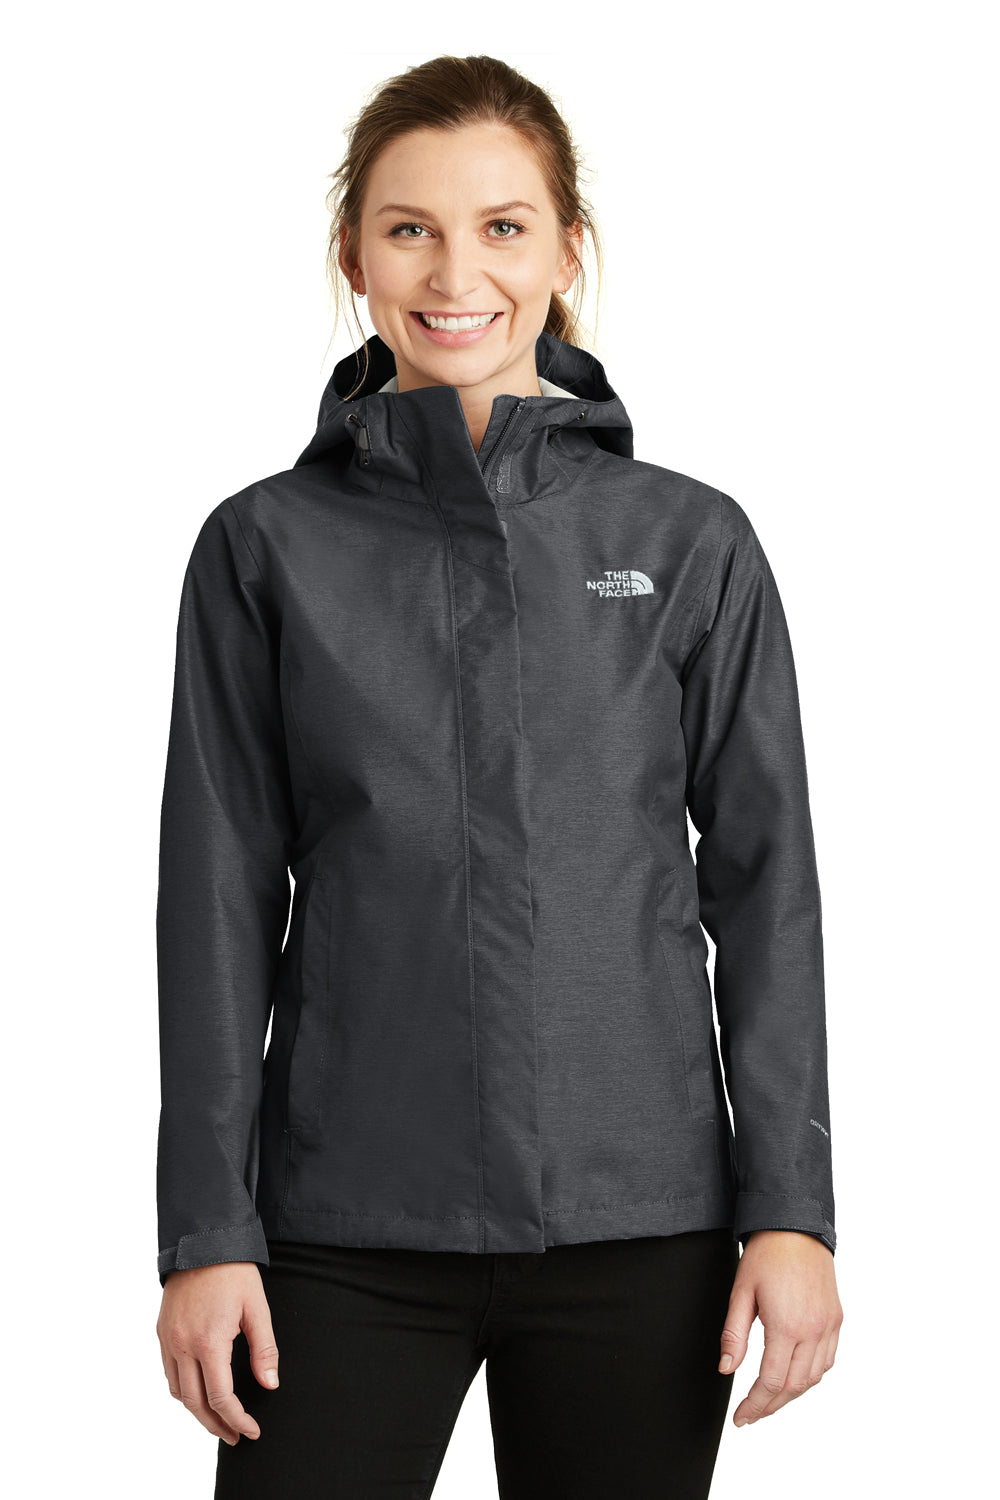 The North Face NF0A3LH5 Womens DryVent Waterproof Full Zip Hooded Jacket Heather Dark Grey Front